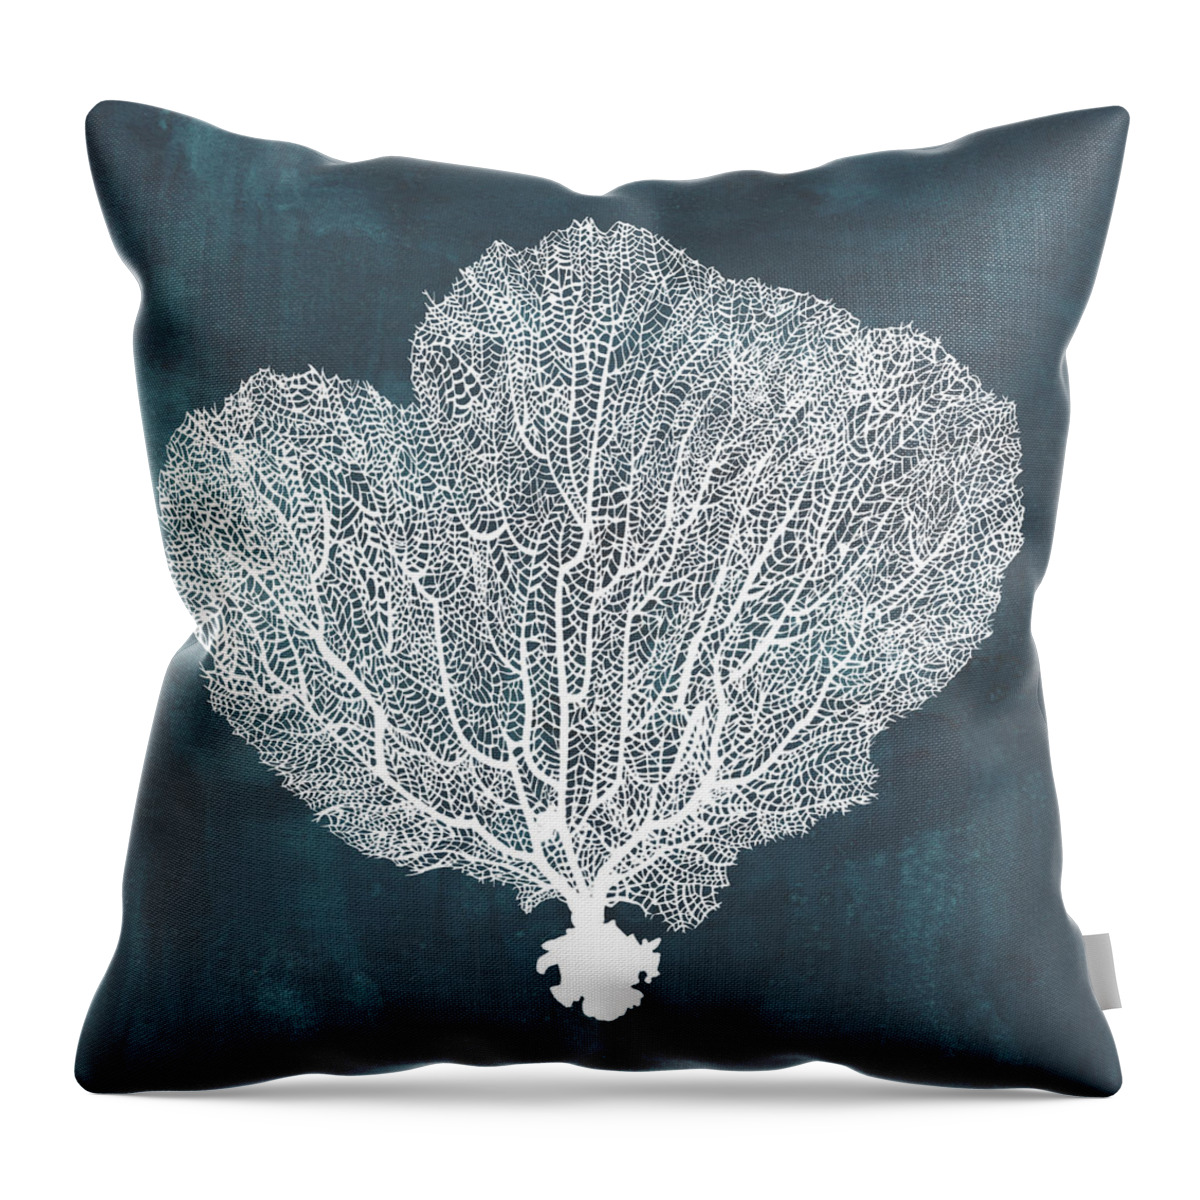 Coastal Throw Pillow featuring the painting Inverse Sea Fan I by Grace Popp